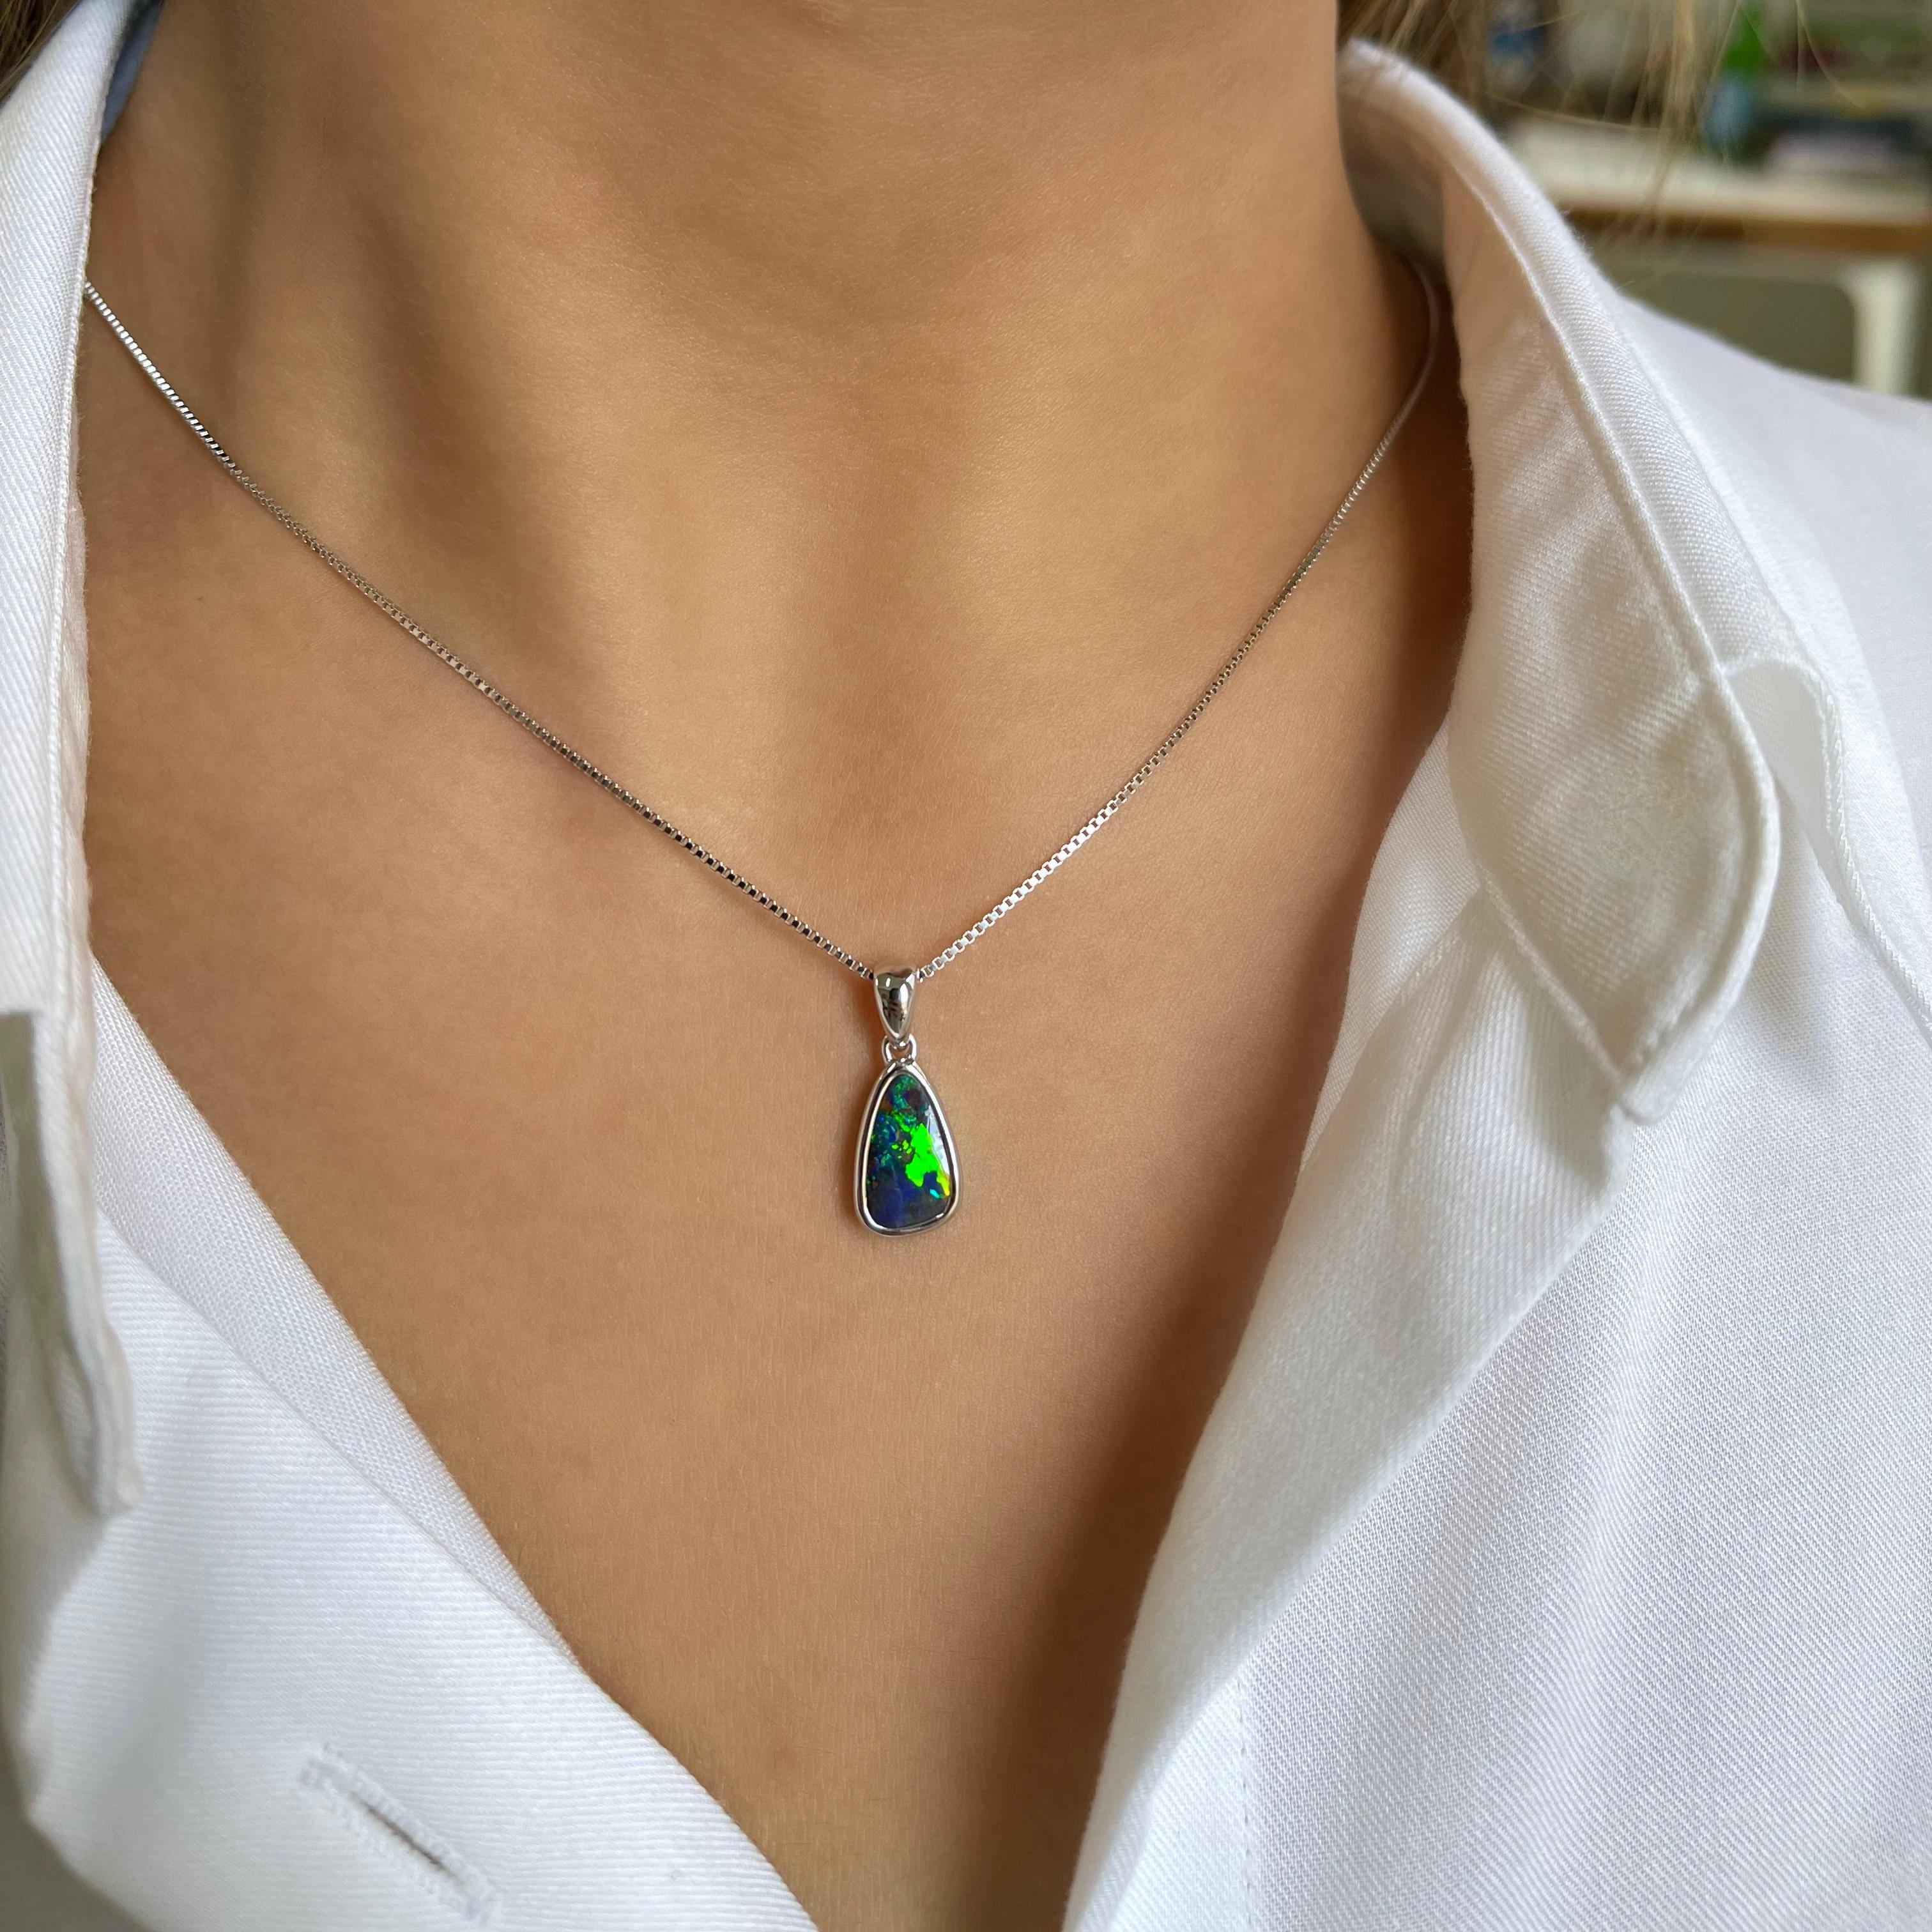 Simple yet stunning, the ‘Evanah’ opal pendant features a vivid green play-of-colour boulder opal (1.86ct) ethically sourced from Winton, Australia. Masterfully set in our classic 18 karats white gold with its minimalistic design. A perfect opal